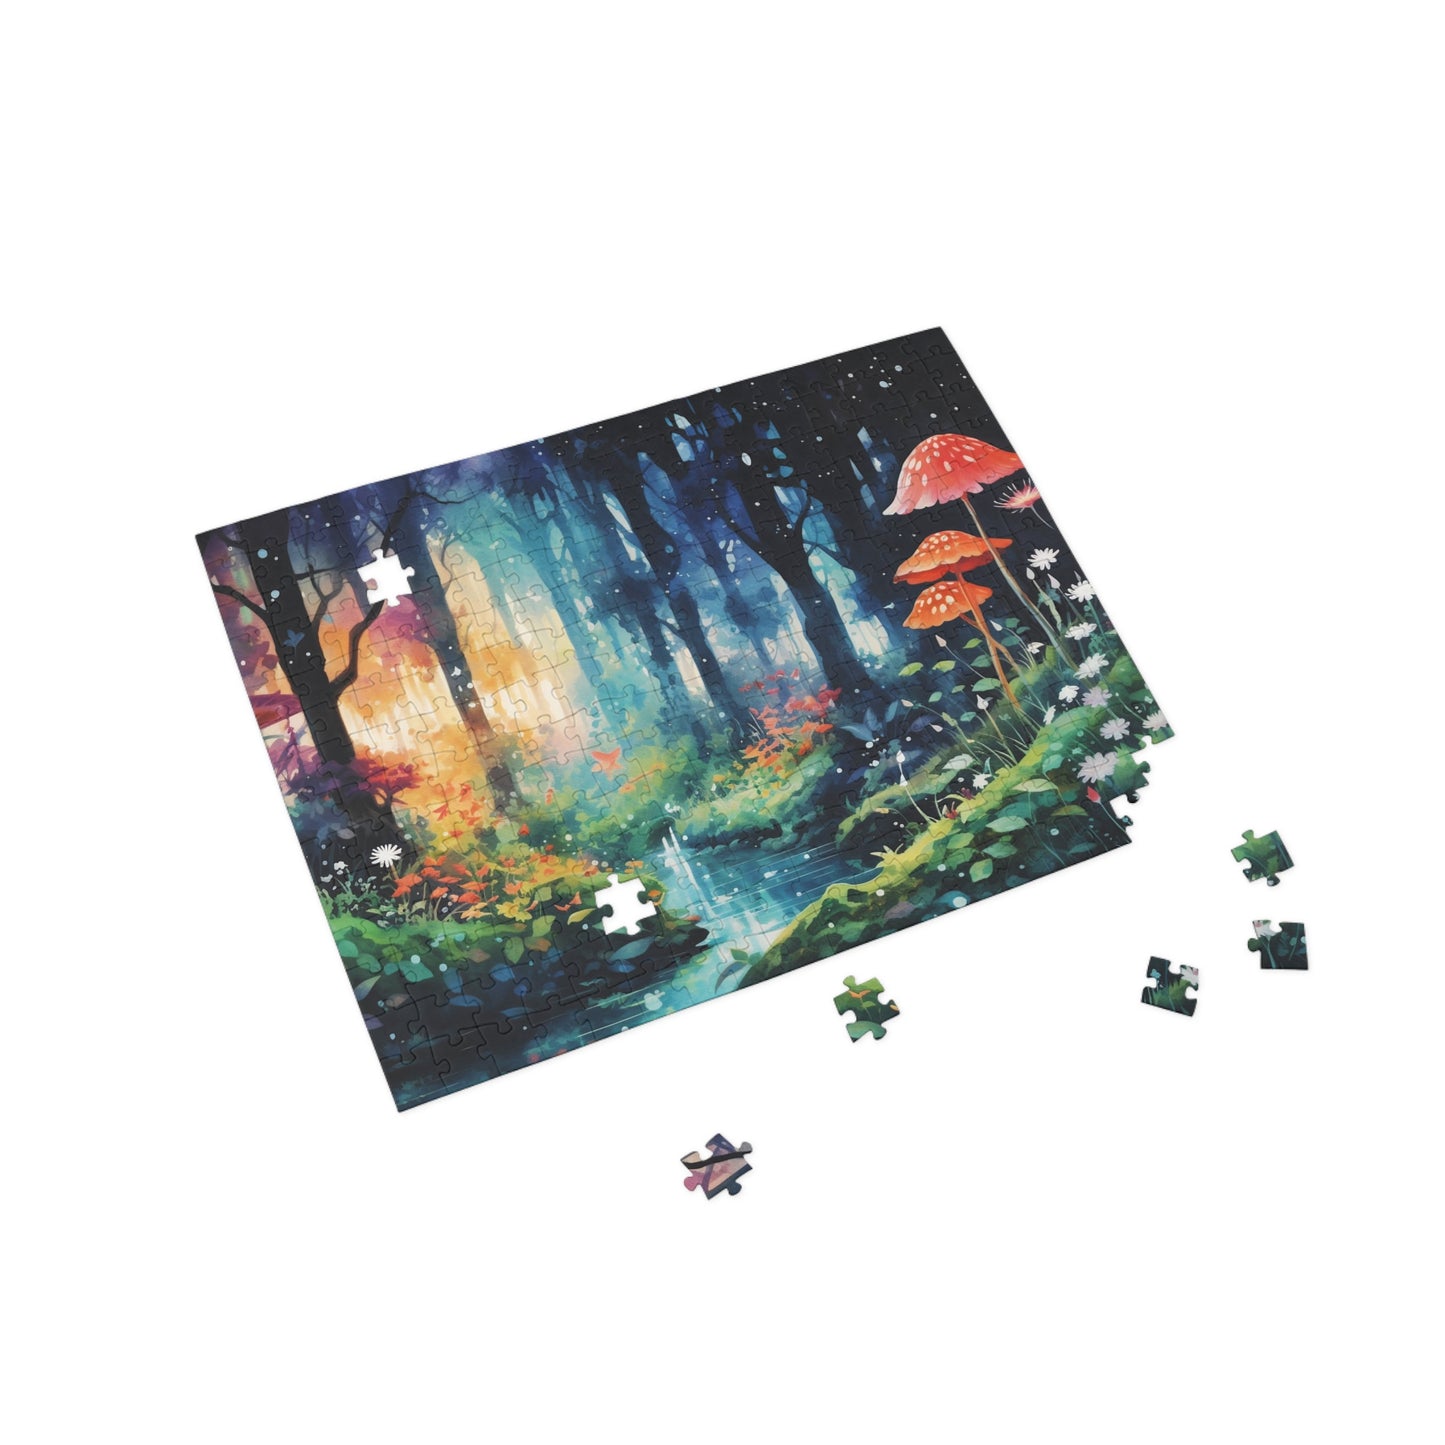 Fantasy Forest 1000 Piece Puzzle, 500 Piece Whimsical Woodland Puzzle, 252 Piece Enchanting Watercolor Forest with Mushrooms Jigsaw Puzzle